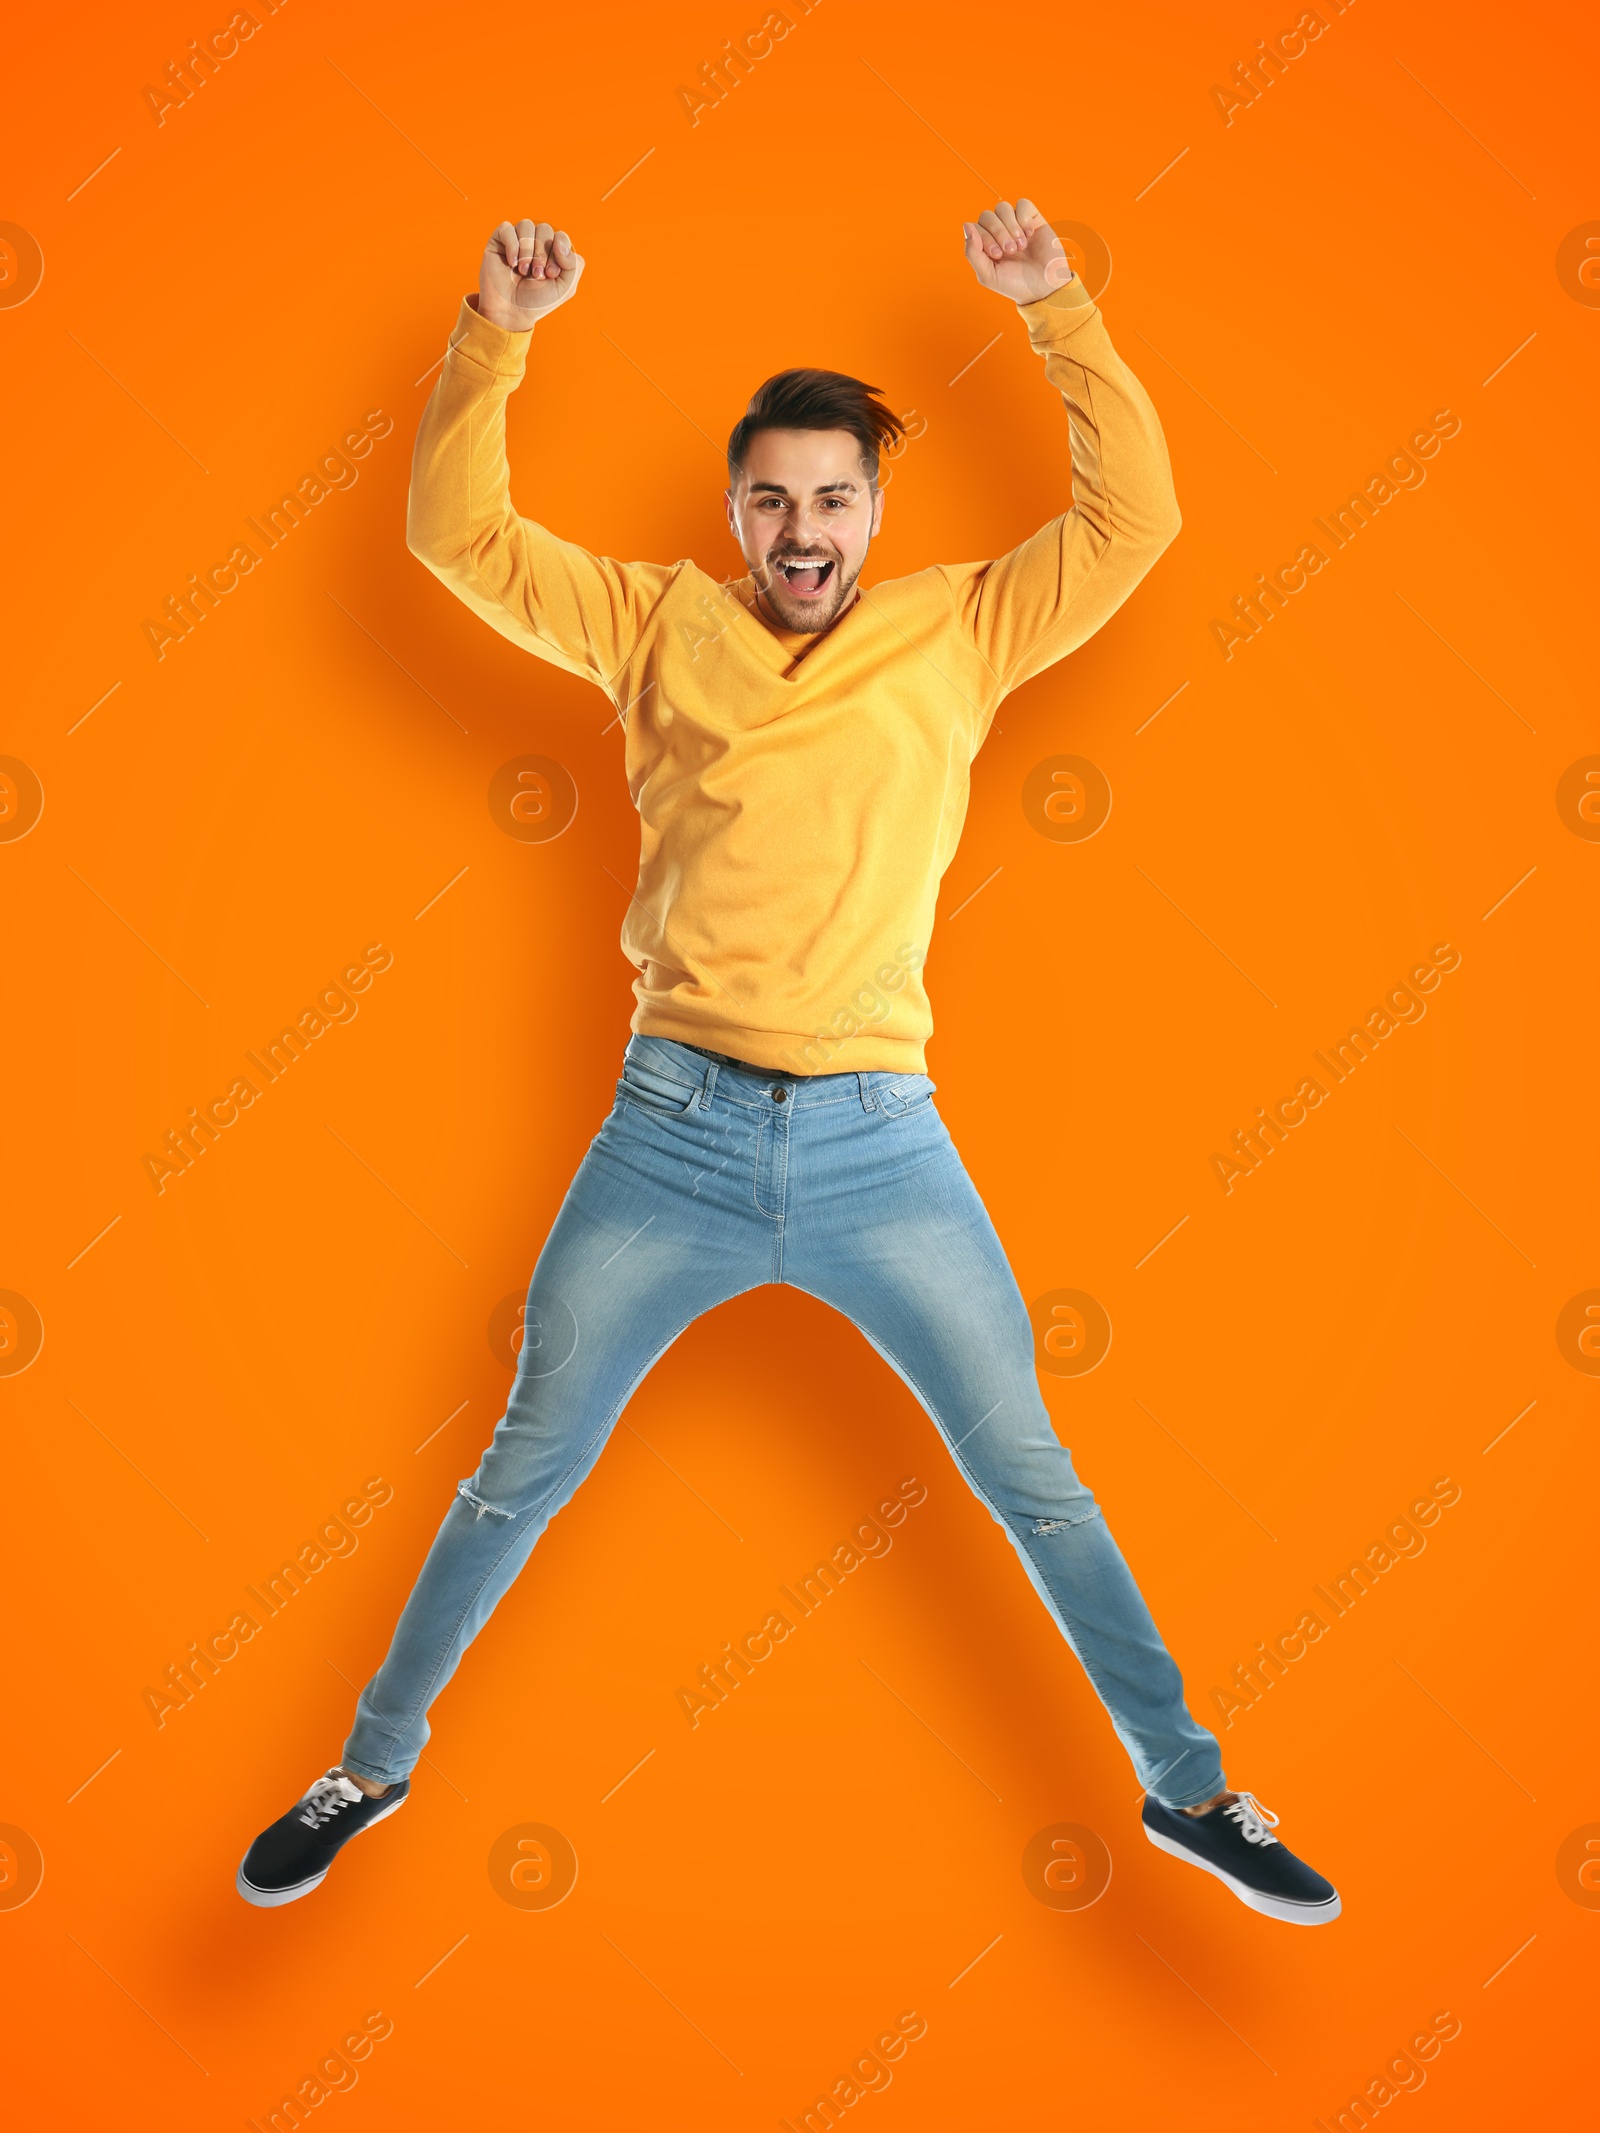 Image of Positive young man jumping on orange background